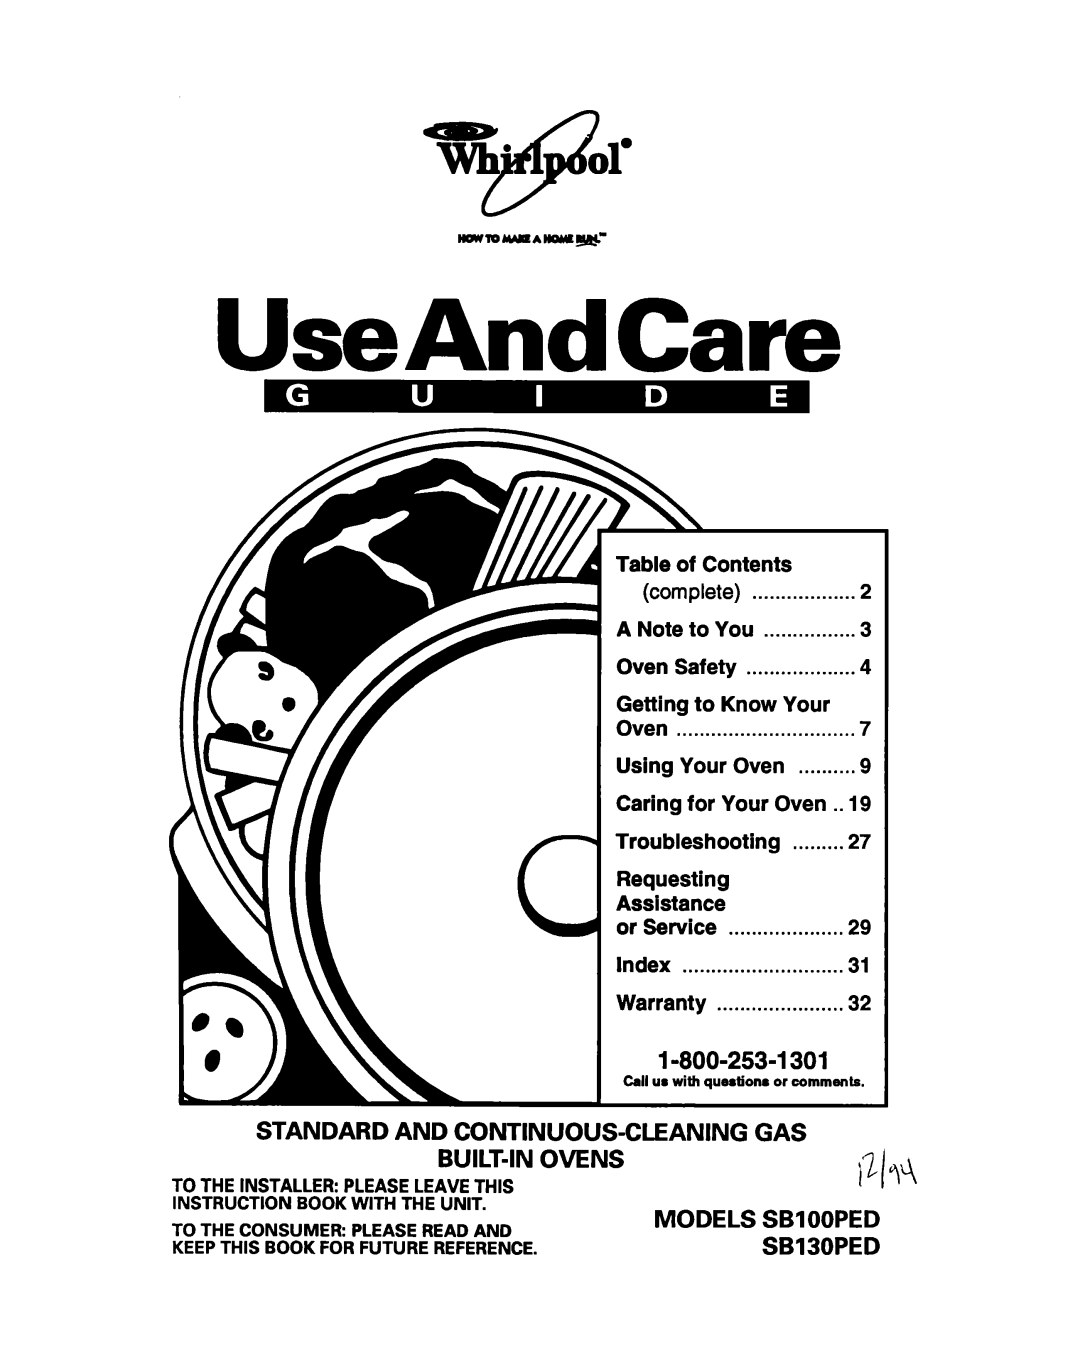 Whirlpool warranty wh 01’ @, UseAndCare, nawToMoA~~, Models, GAS i21 T-4 SBIOOPED SBISOPED 